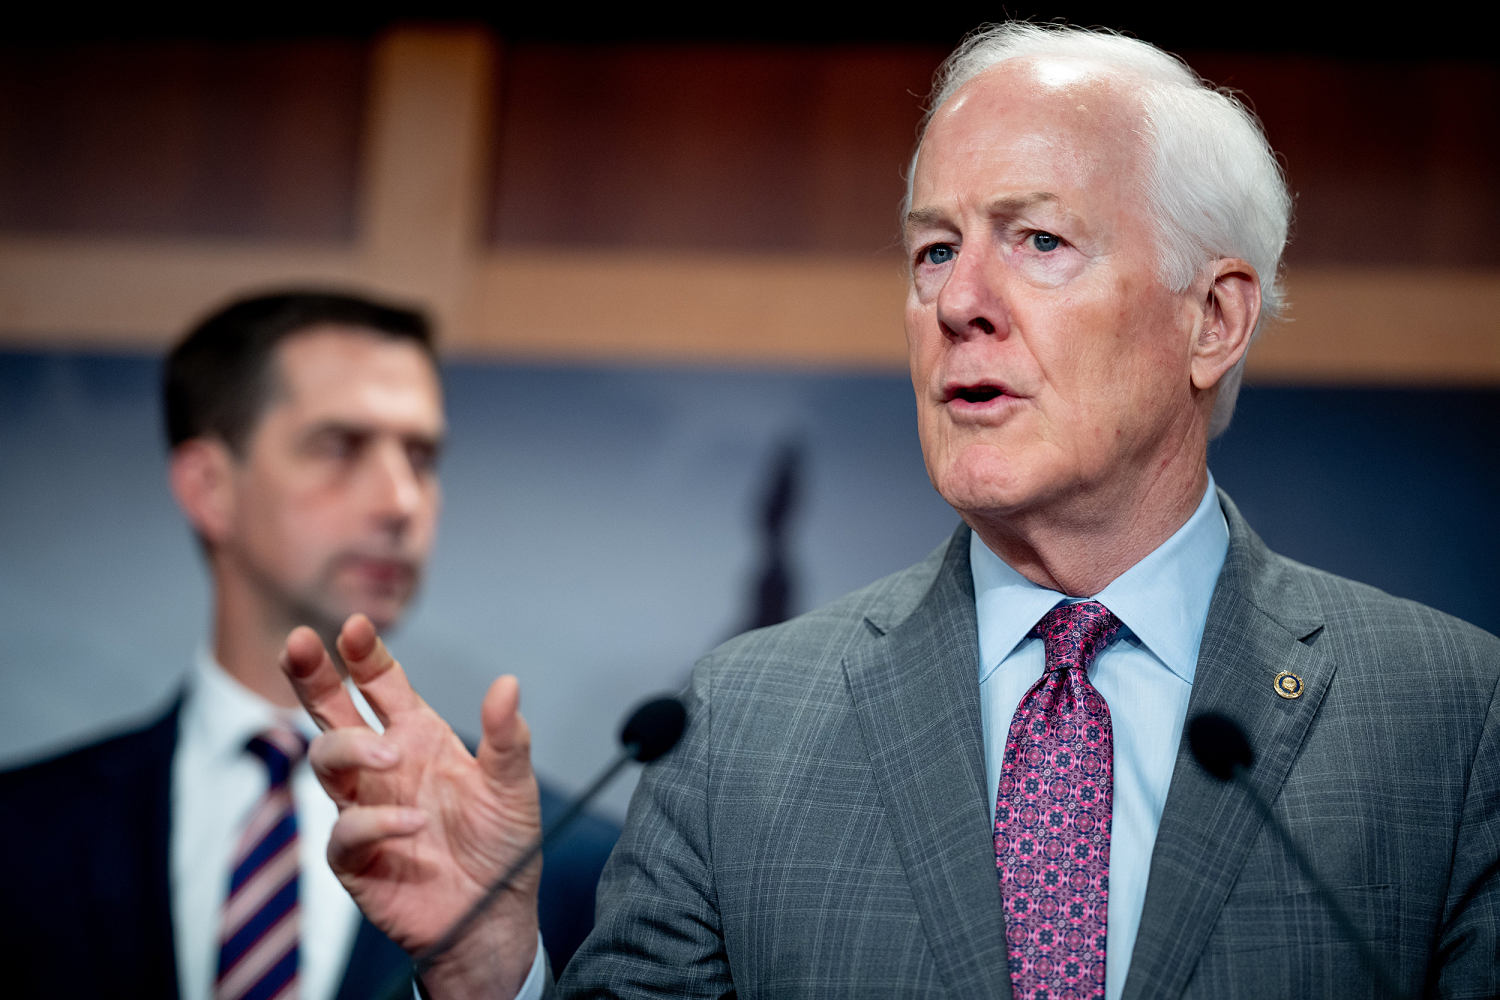 John Cornyn comes to Alito’s defense over the flags at his homes